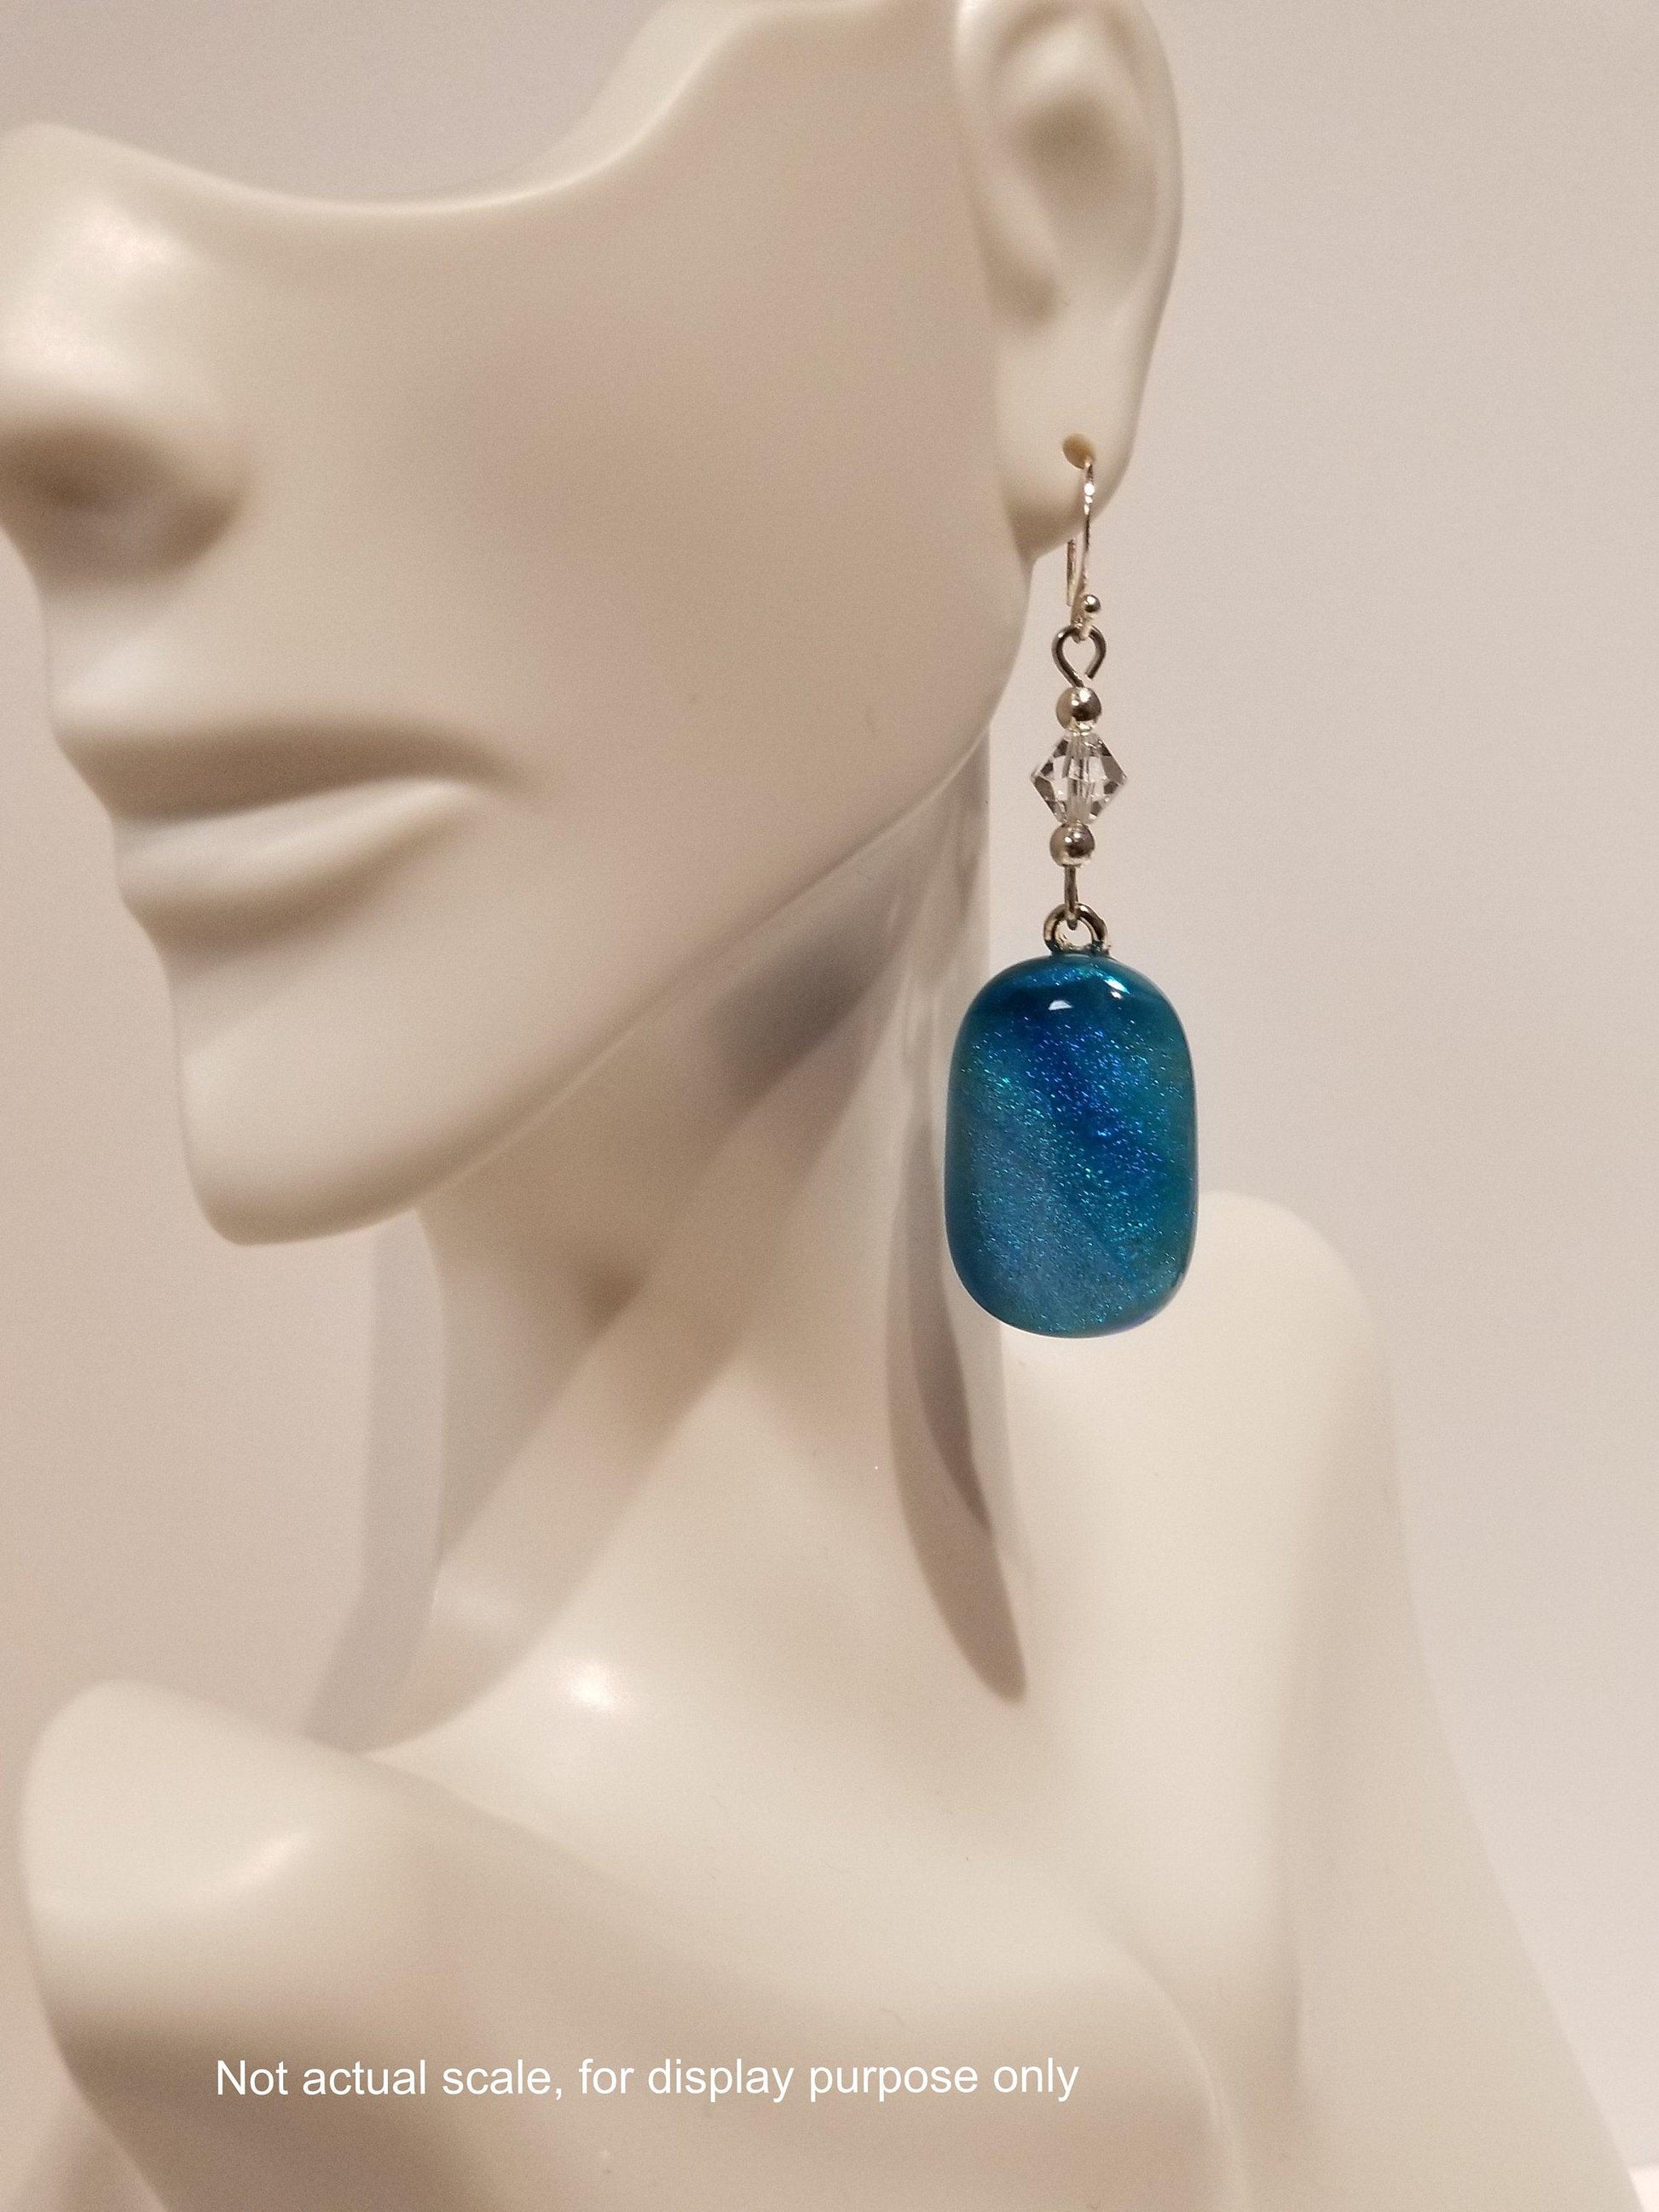 Blue Galaxy sparkle fused glass pierced dangle earrings, silver wire hooks with crystal bead accents